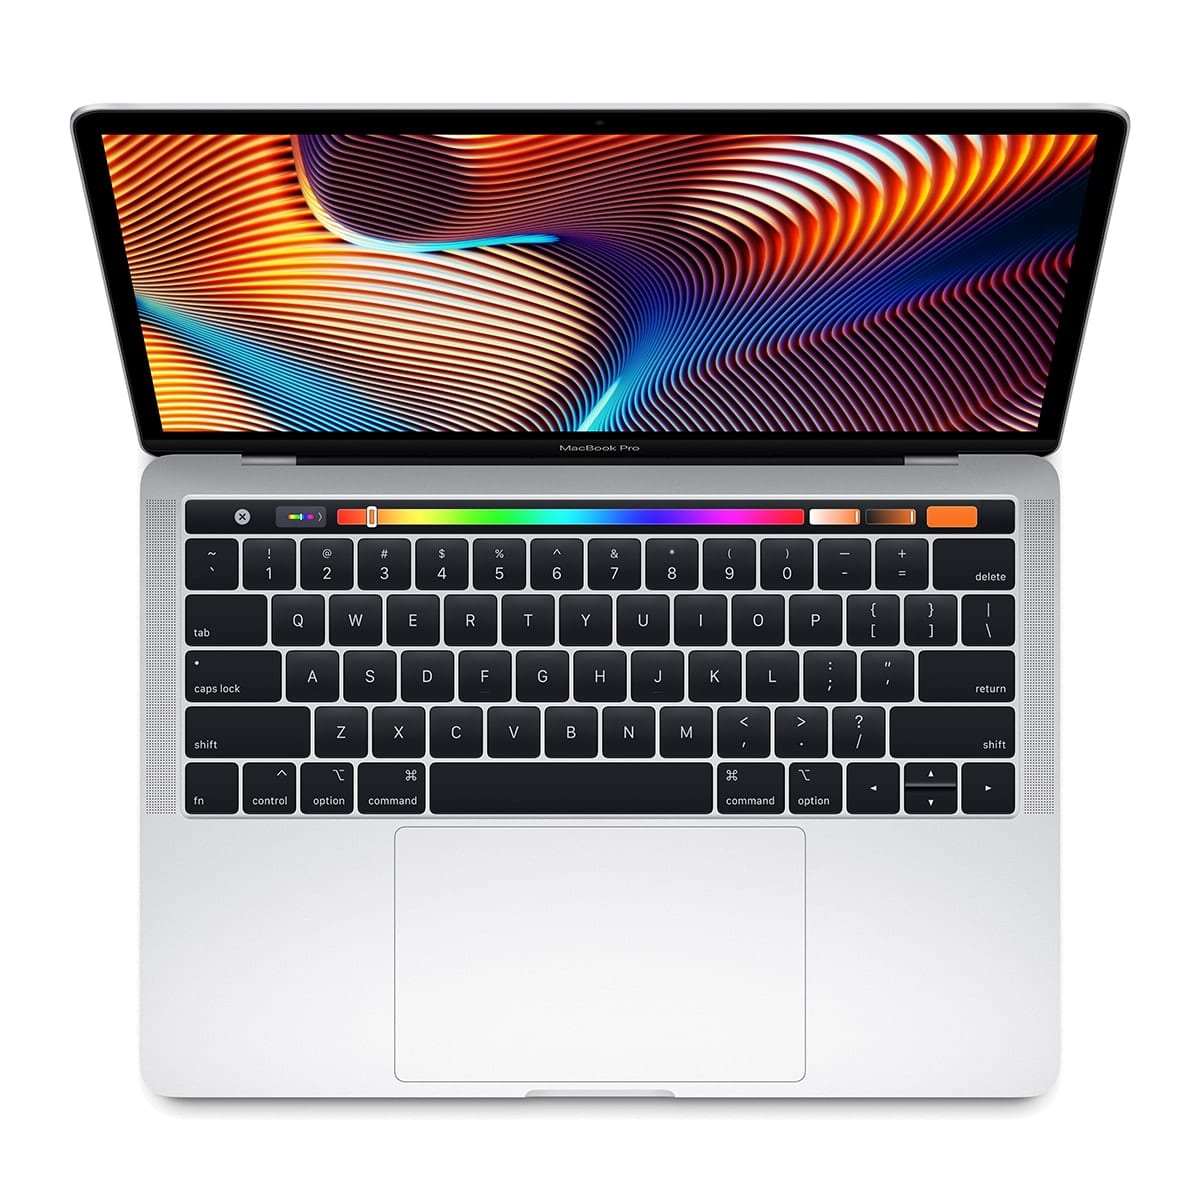 The entry-level 13-inch MacBook Pro features new, more powerful quad-core processors, Touch Bar, Touch ID and more